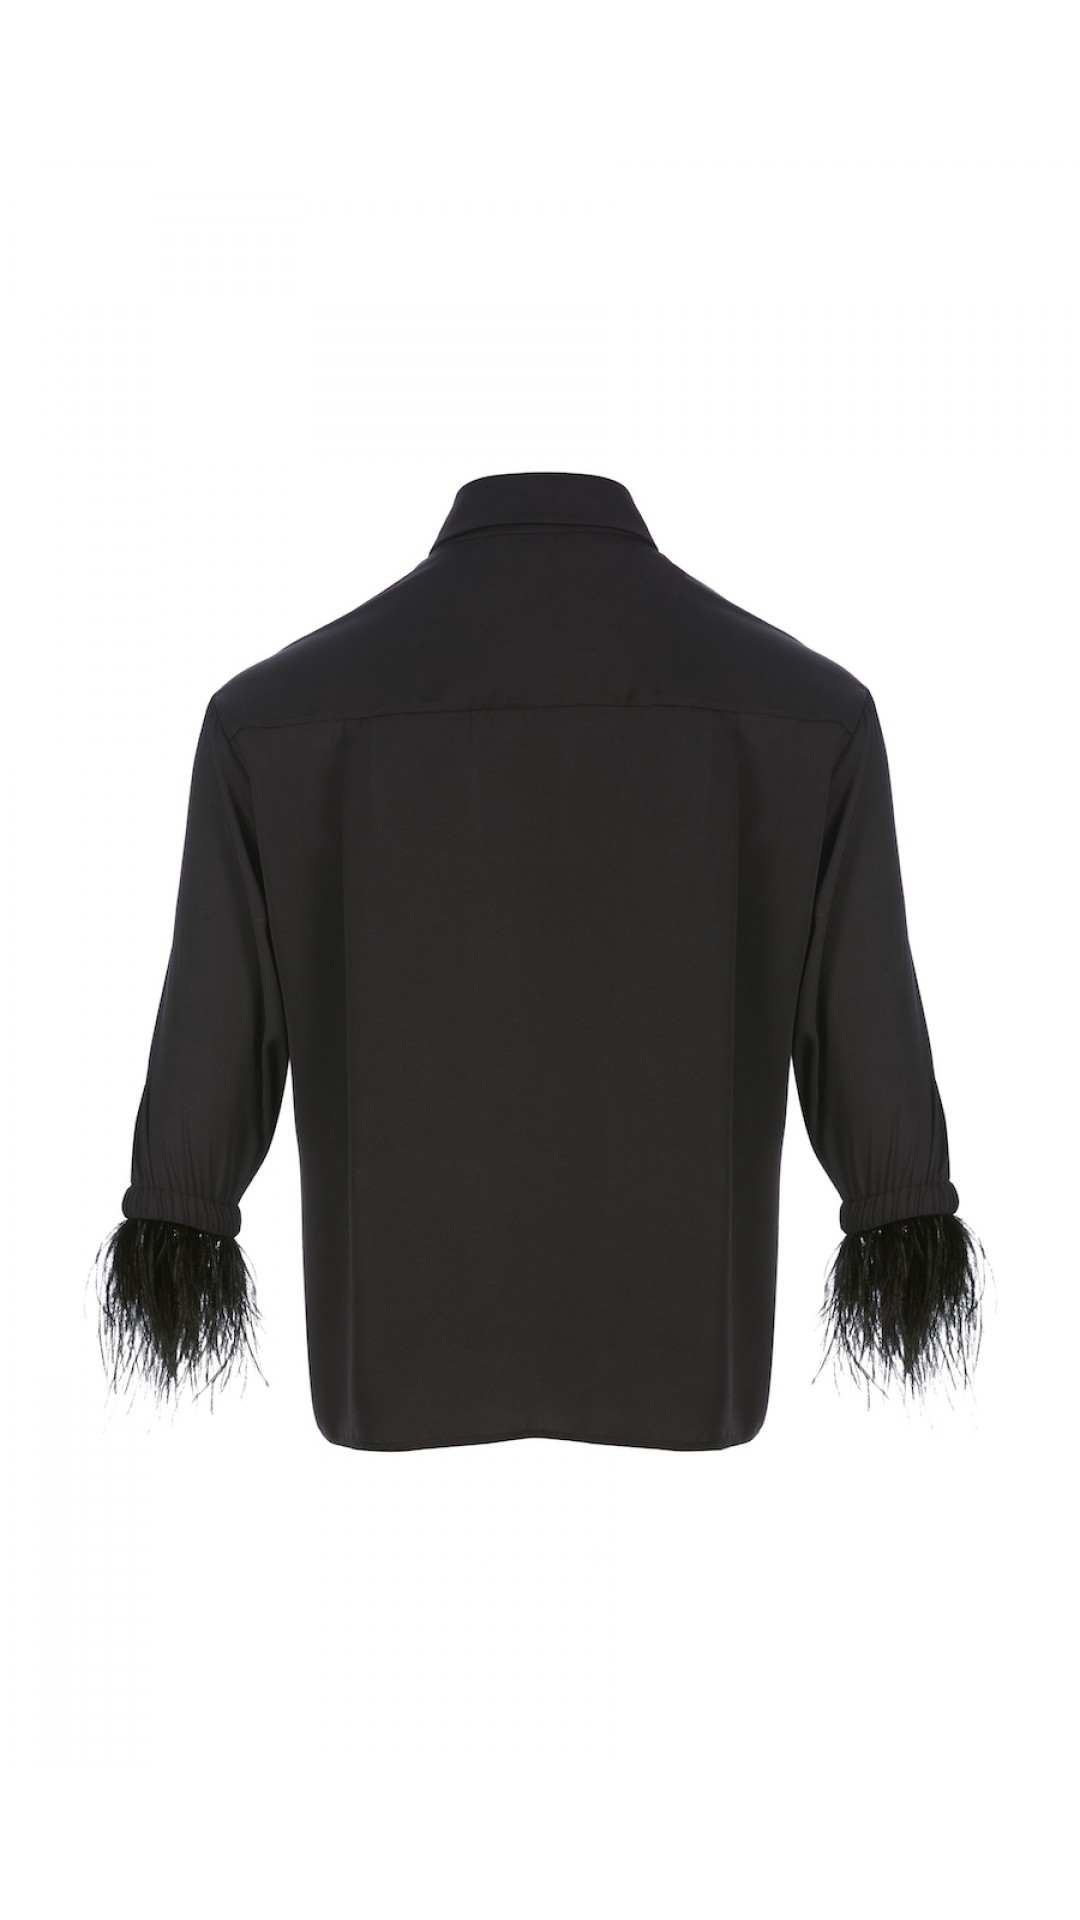 BLACK SHIRT WITH FEATHER DETAILS 